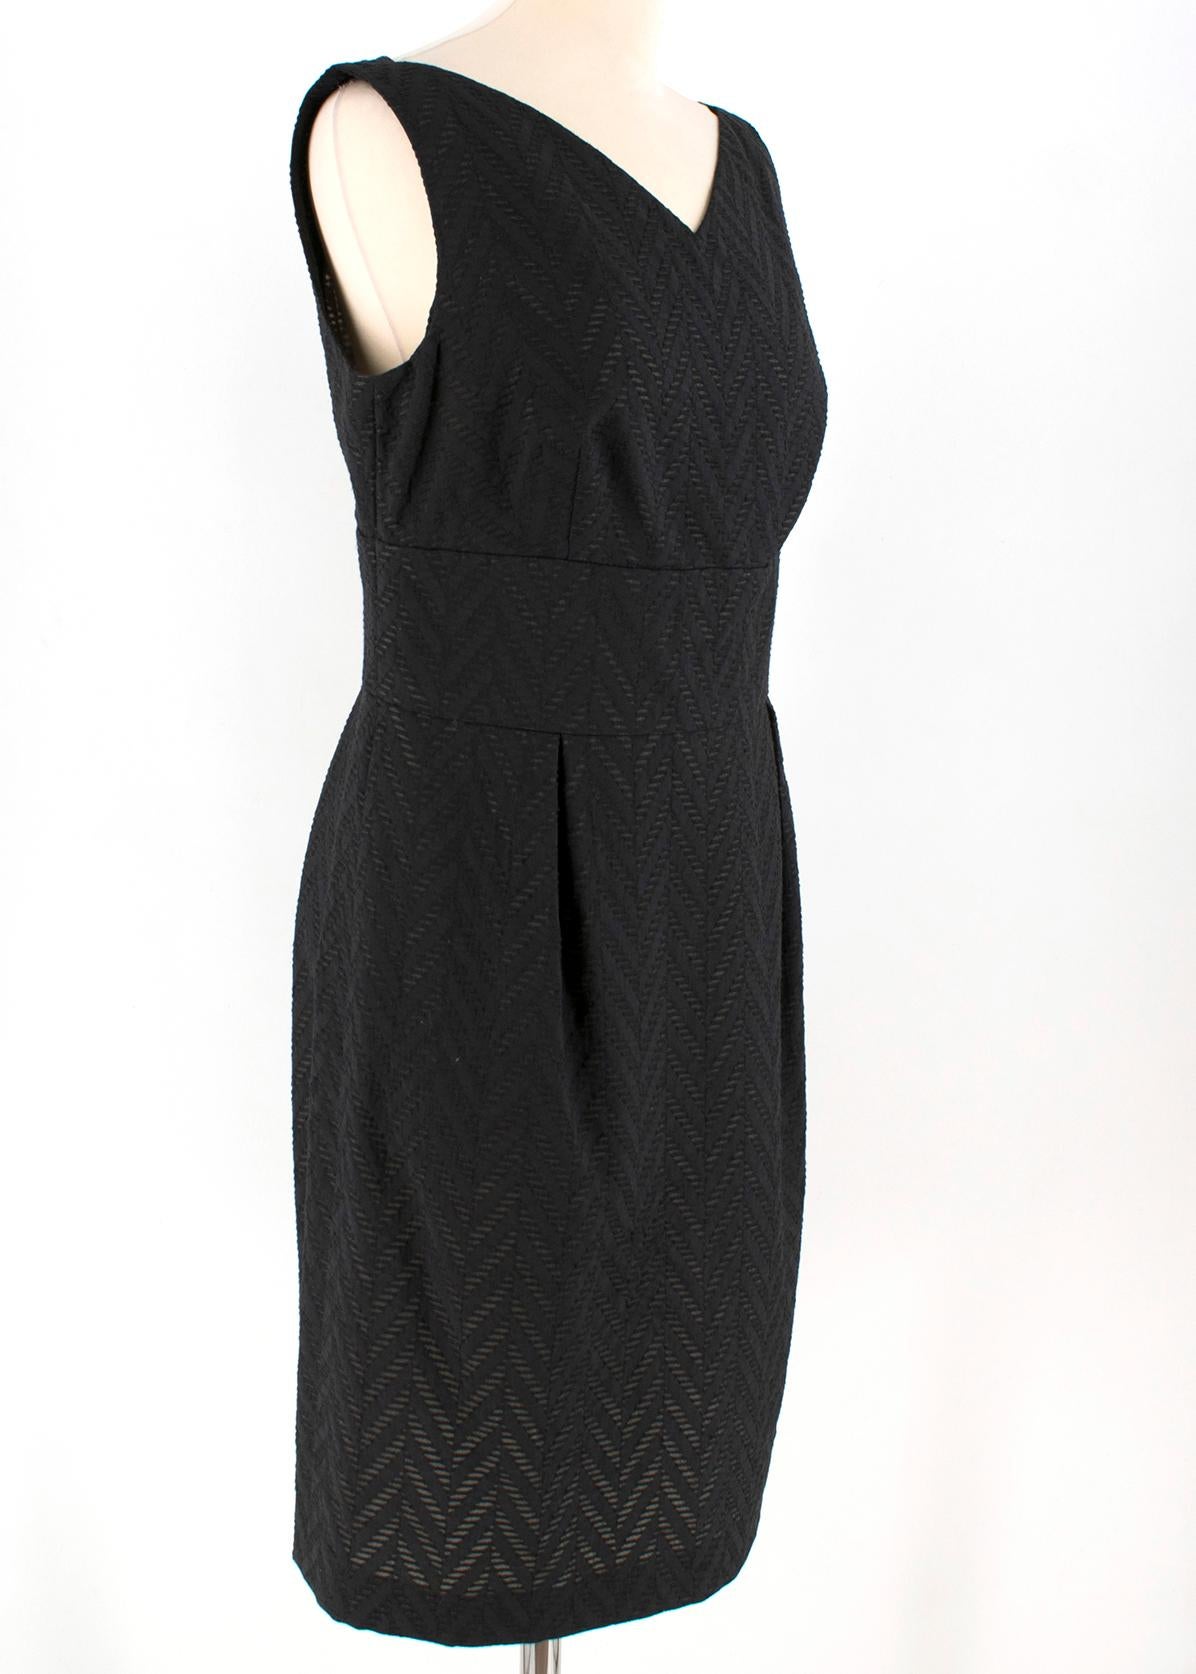 Escada Black Textured Midi Shift Virgin Wool Dress 

- Virgin Wool Woven Jacquard Body
- Darts to the bust for fit
- Fully Lined
- Made in Germany 

Please note, these items are pre-owned and may show some signs of storage, even when unworn and